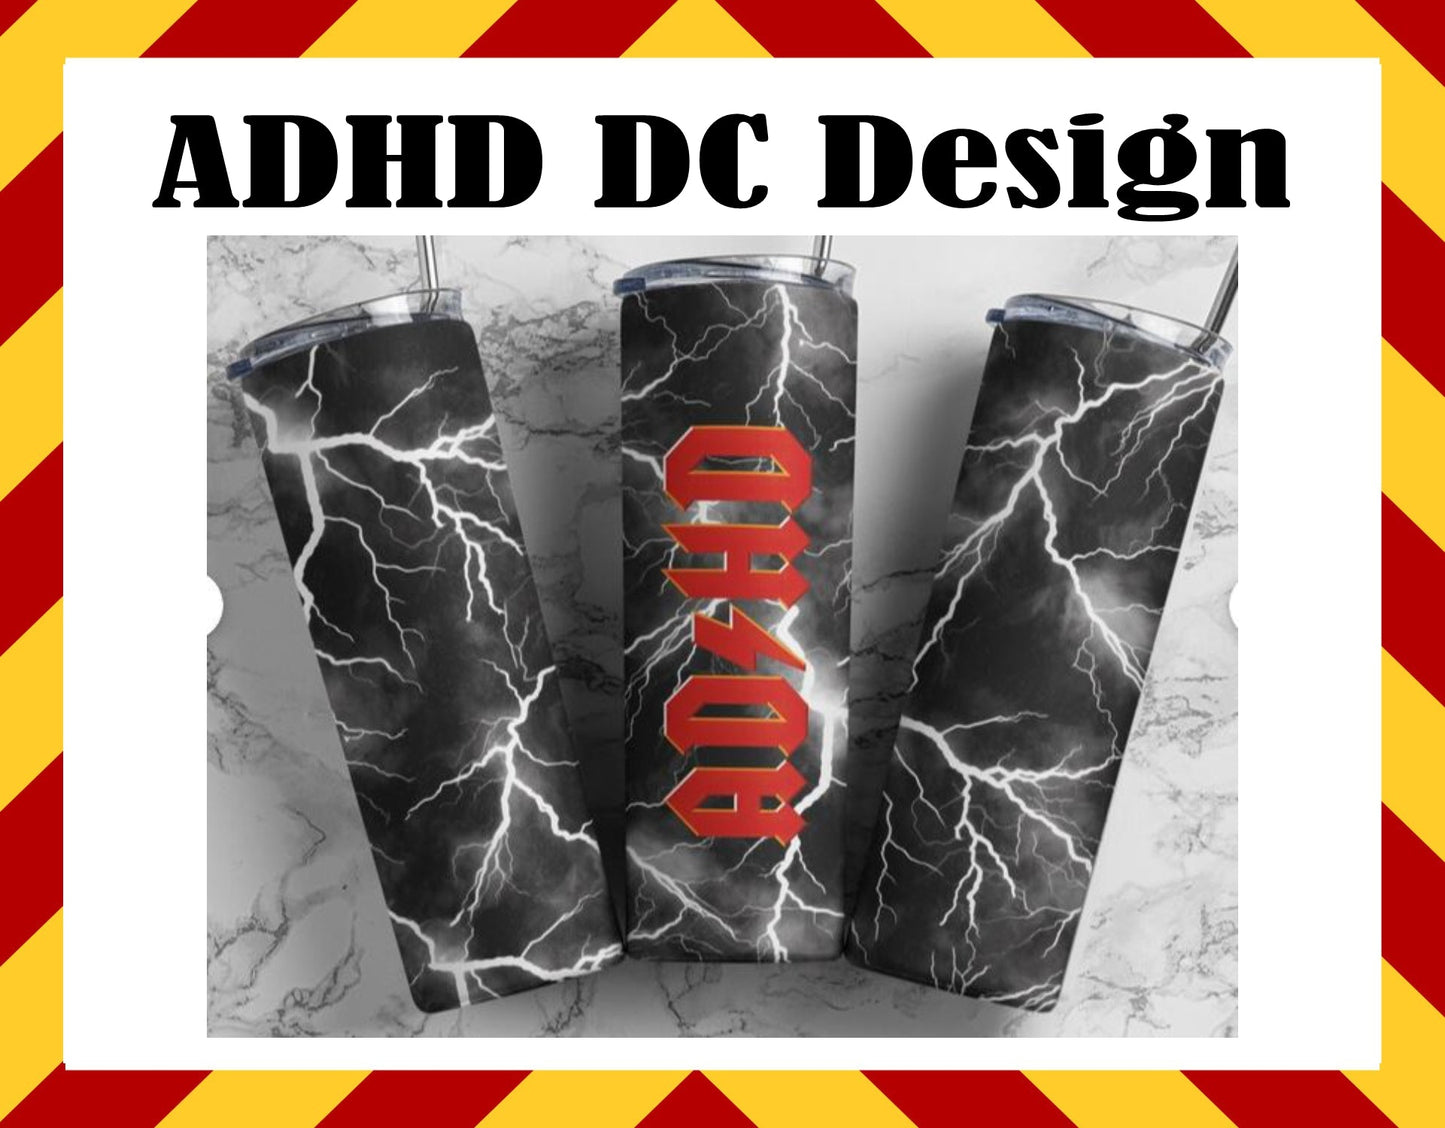 Drink Water Cup - ADHD & Autism Cup Designs